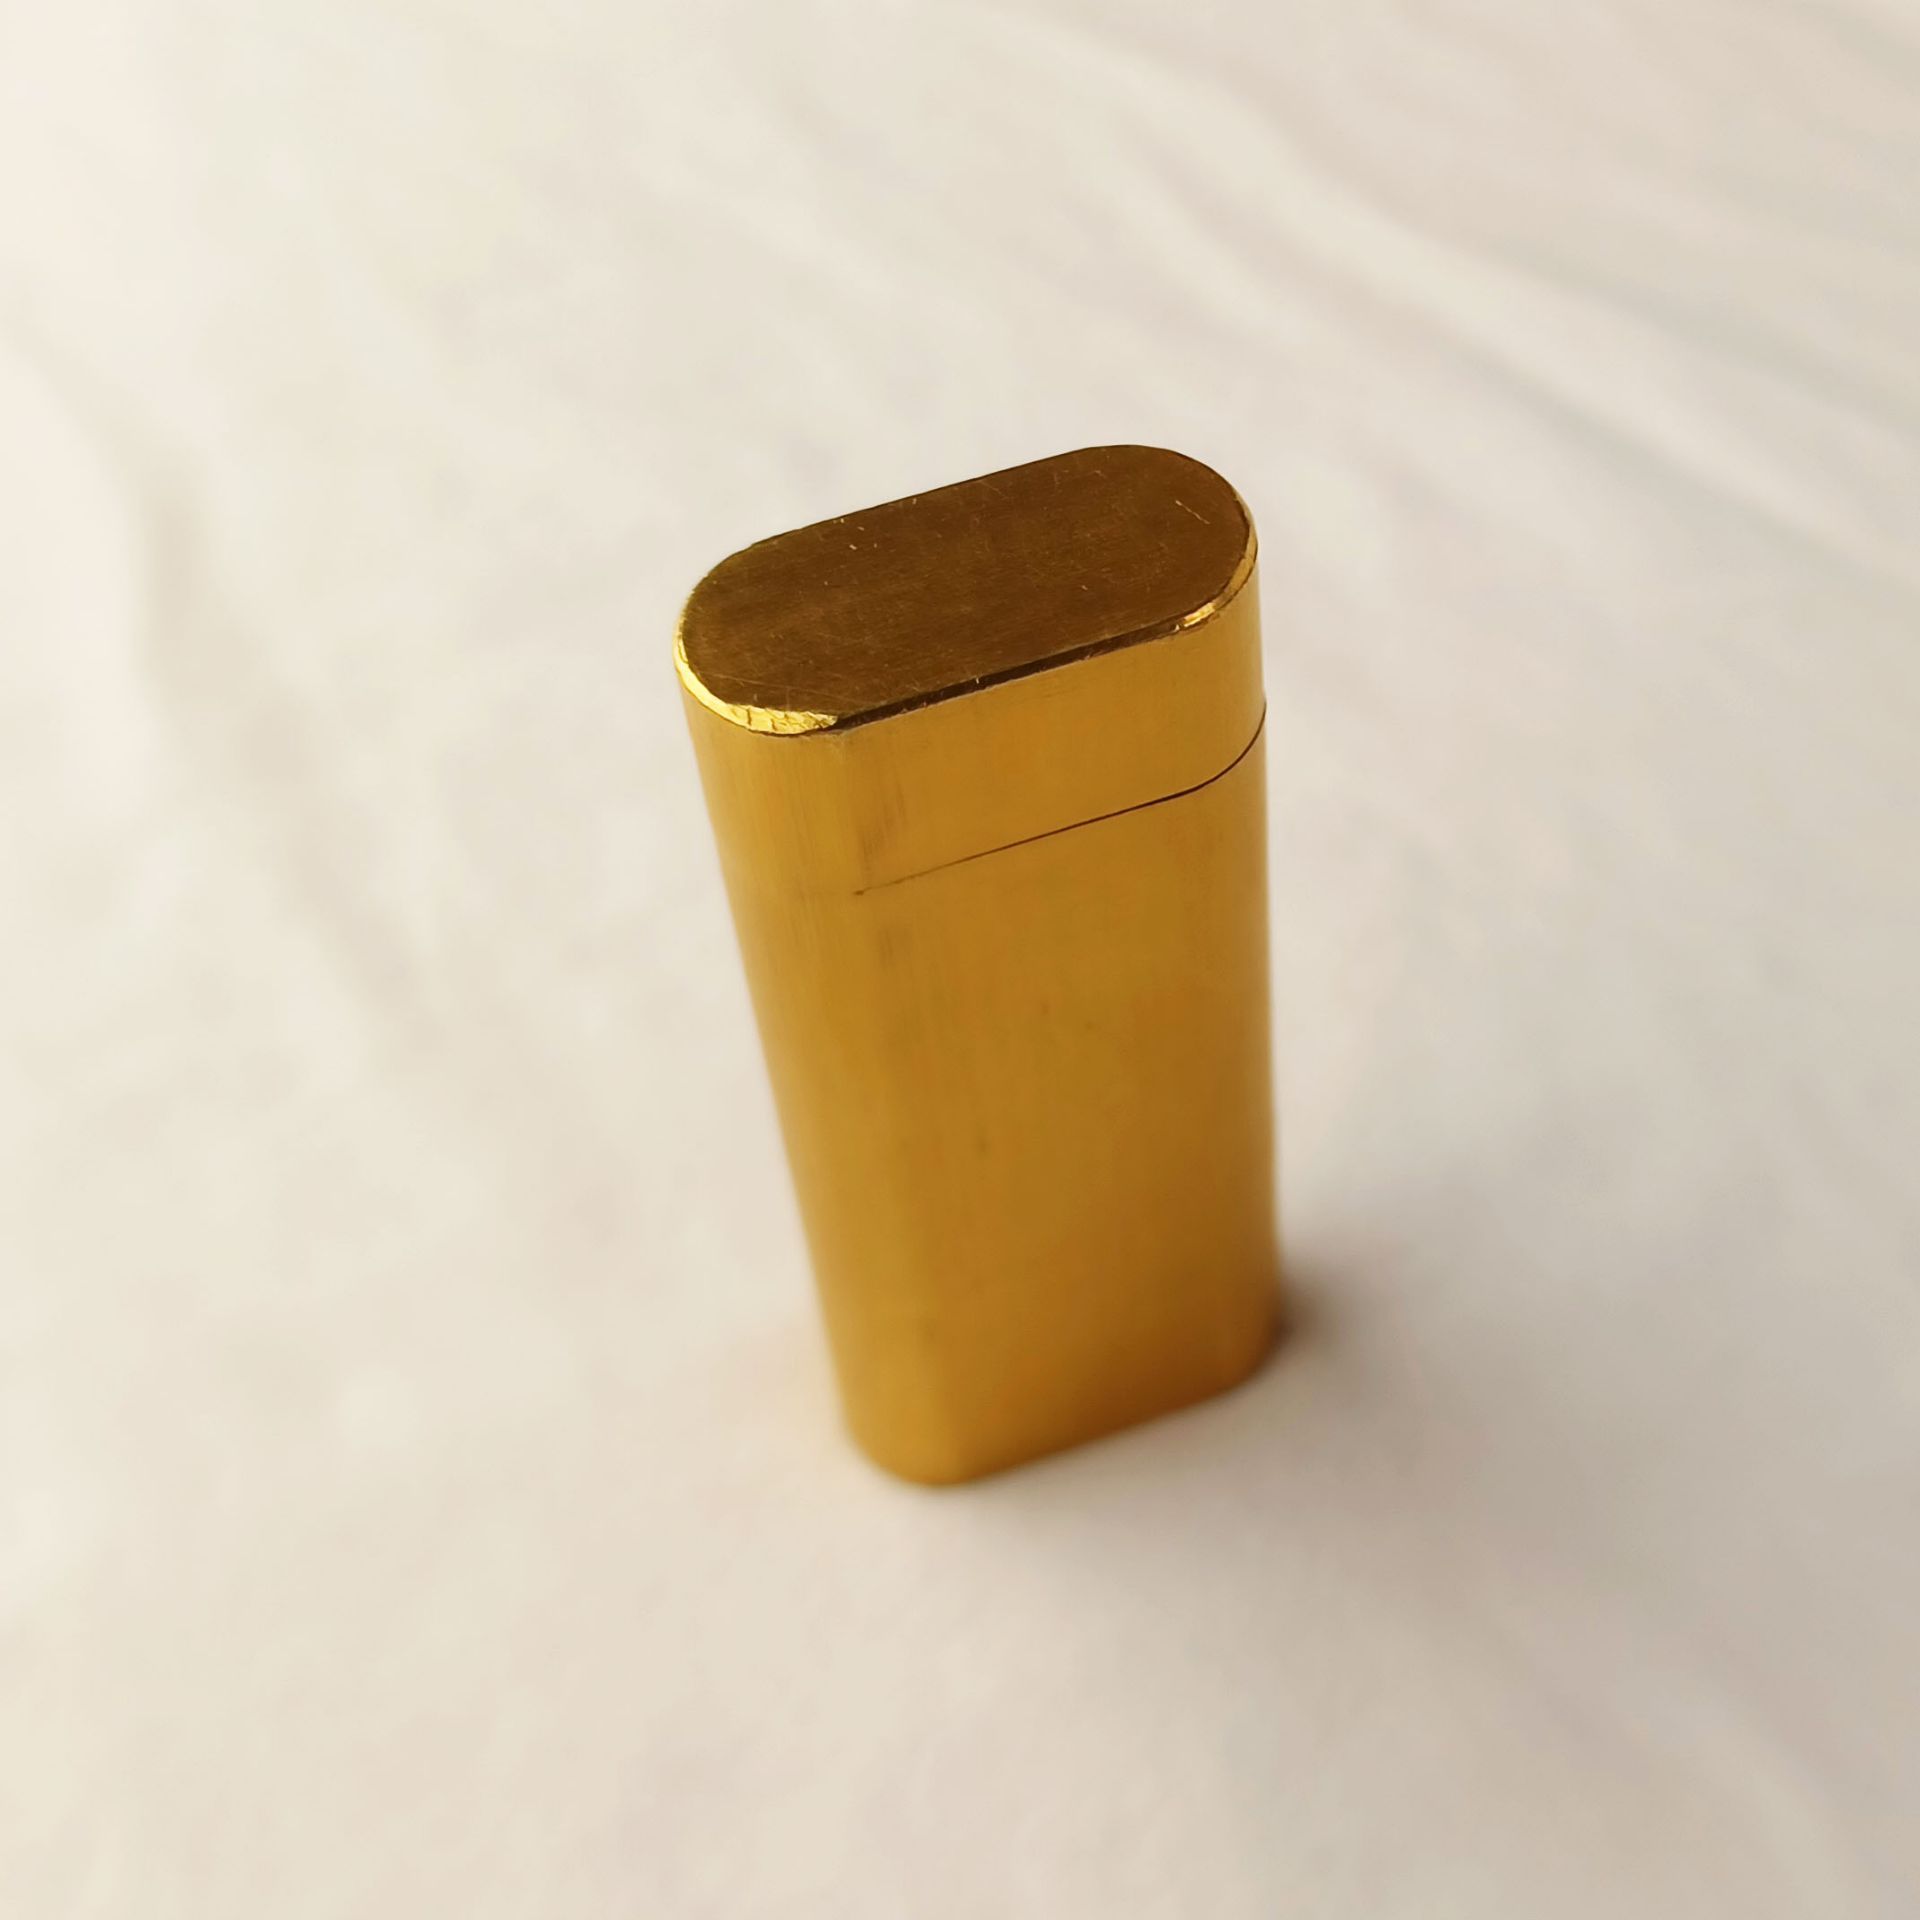 Cartier gold plated lighter 1993 - Image 3 of 6